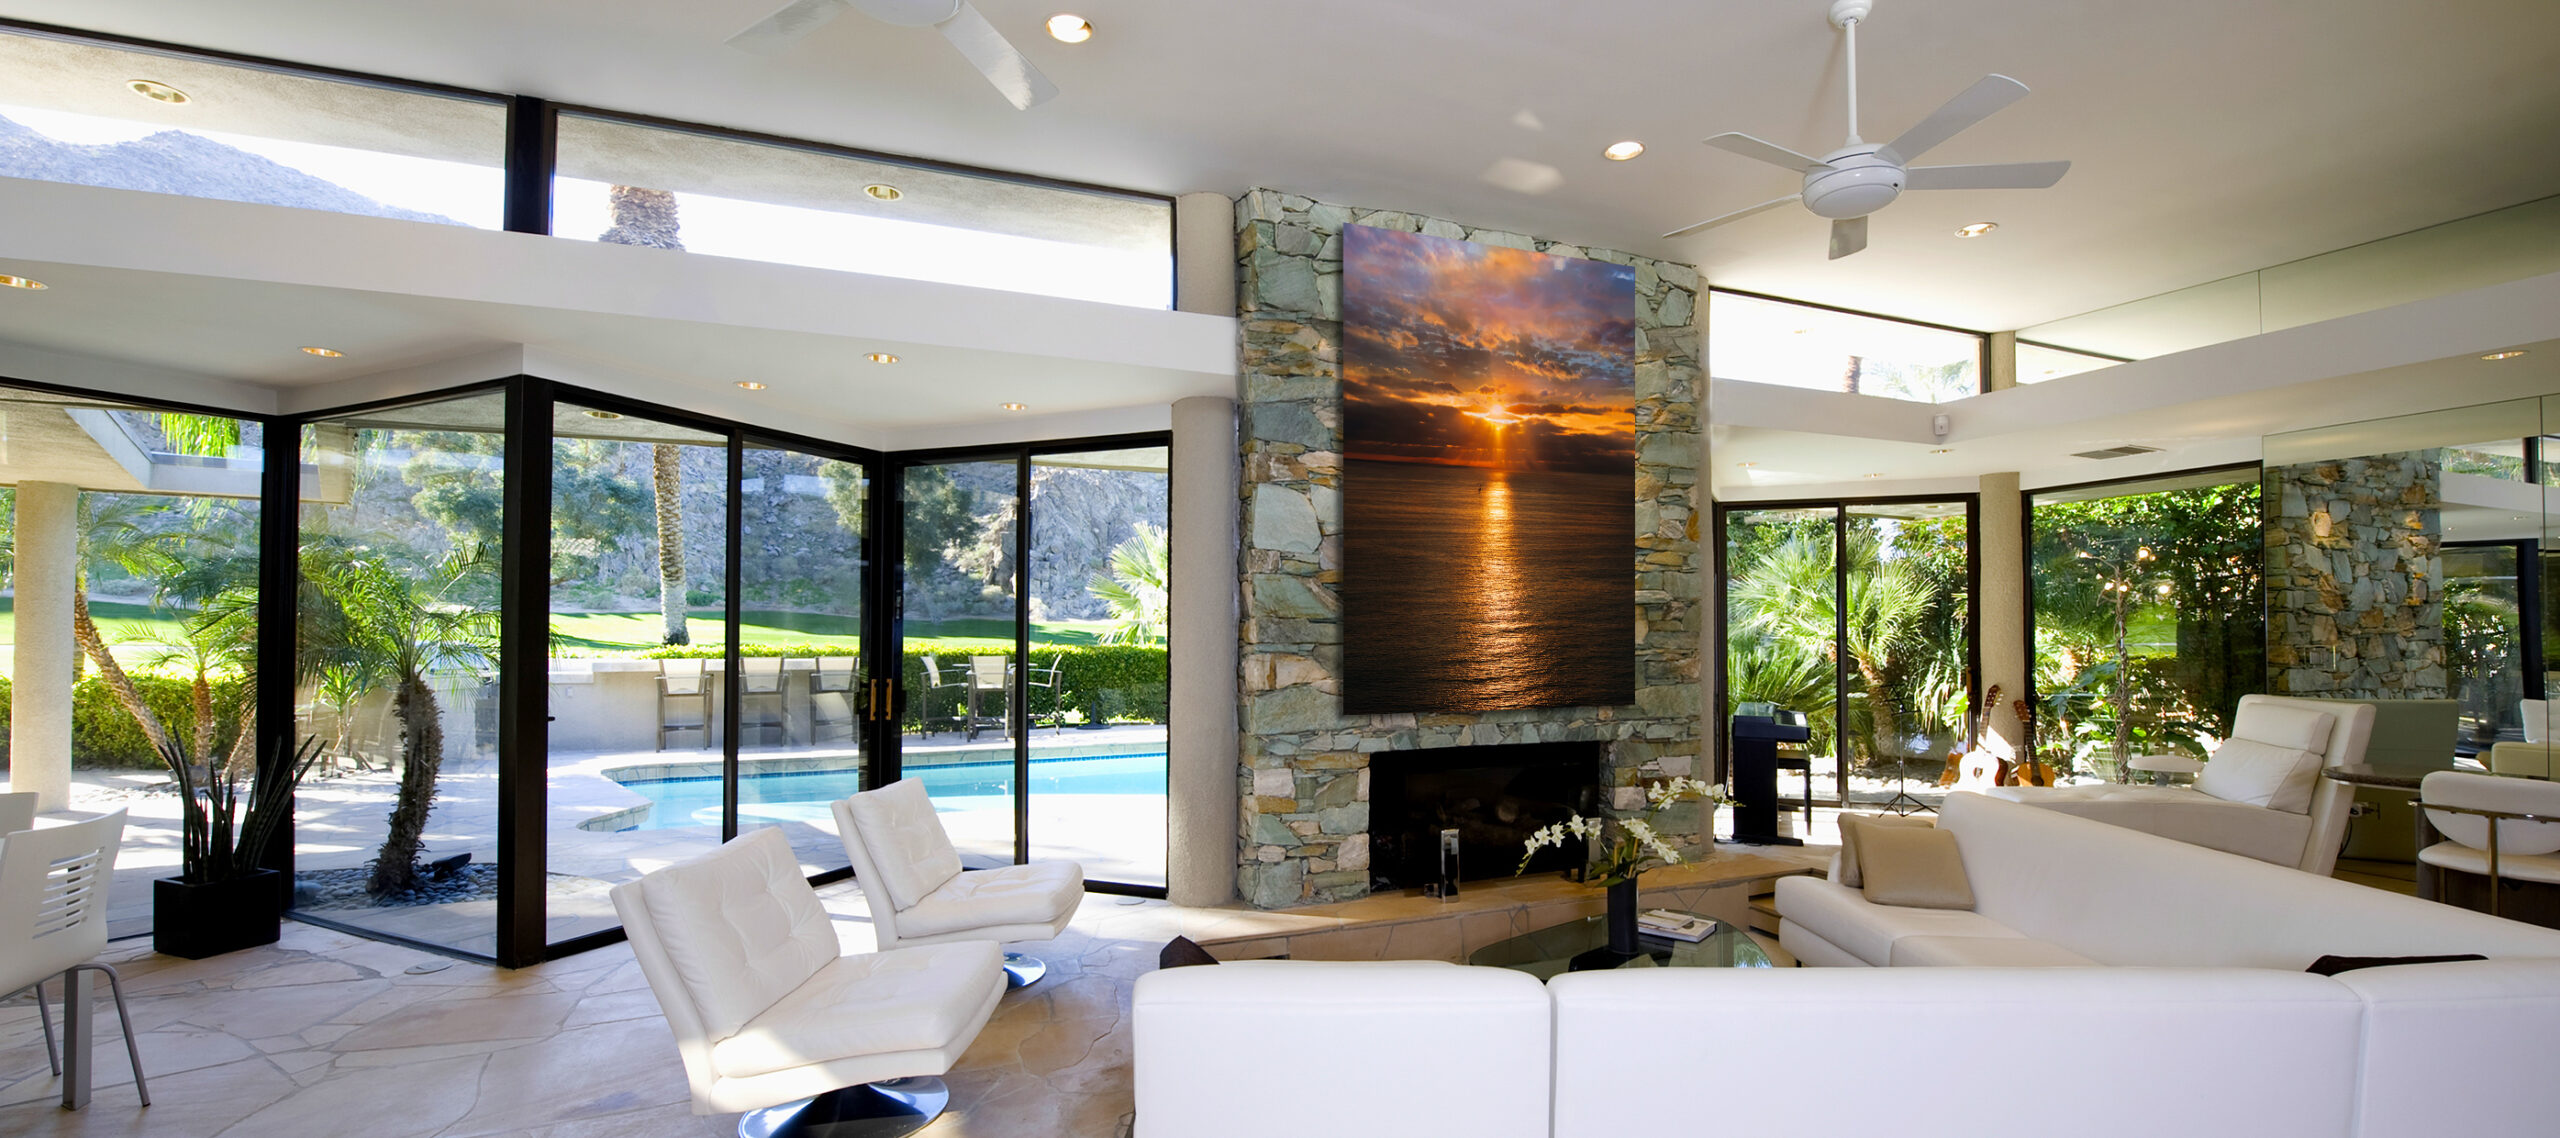 Sunken,Seating,Area,And,Exposed,Stone,Fireplace,In,Spacious,Living